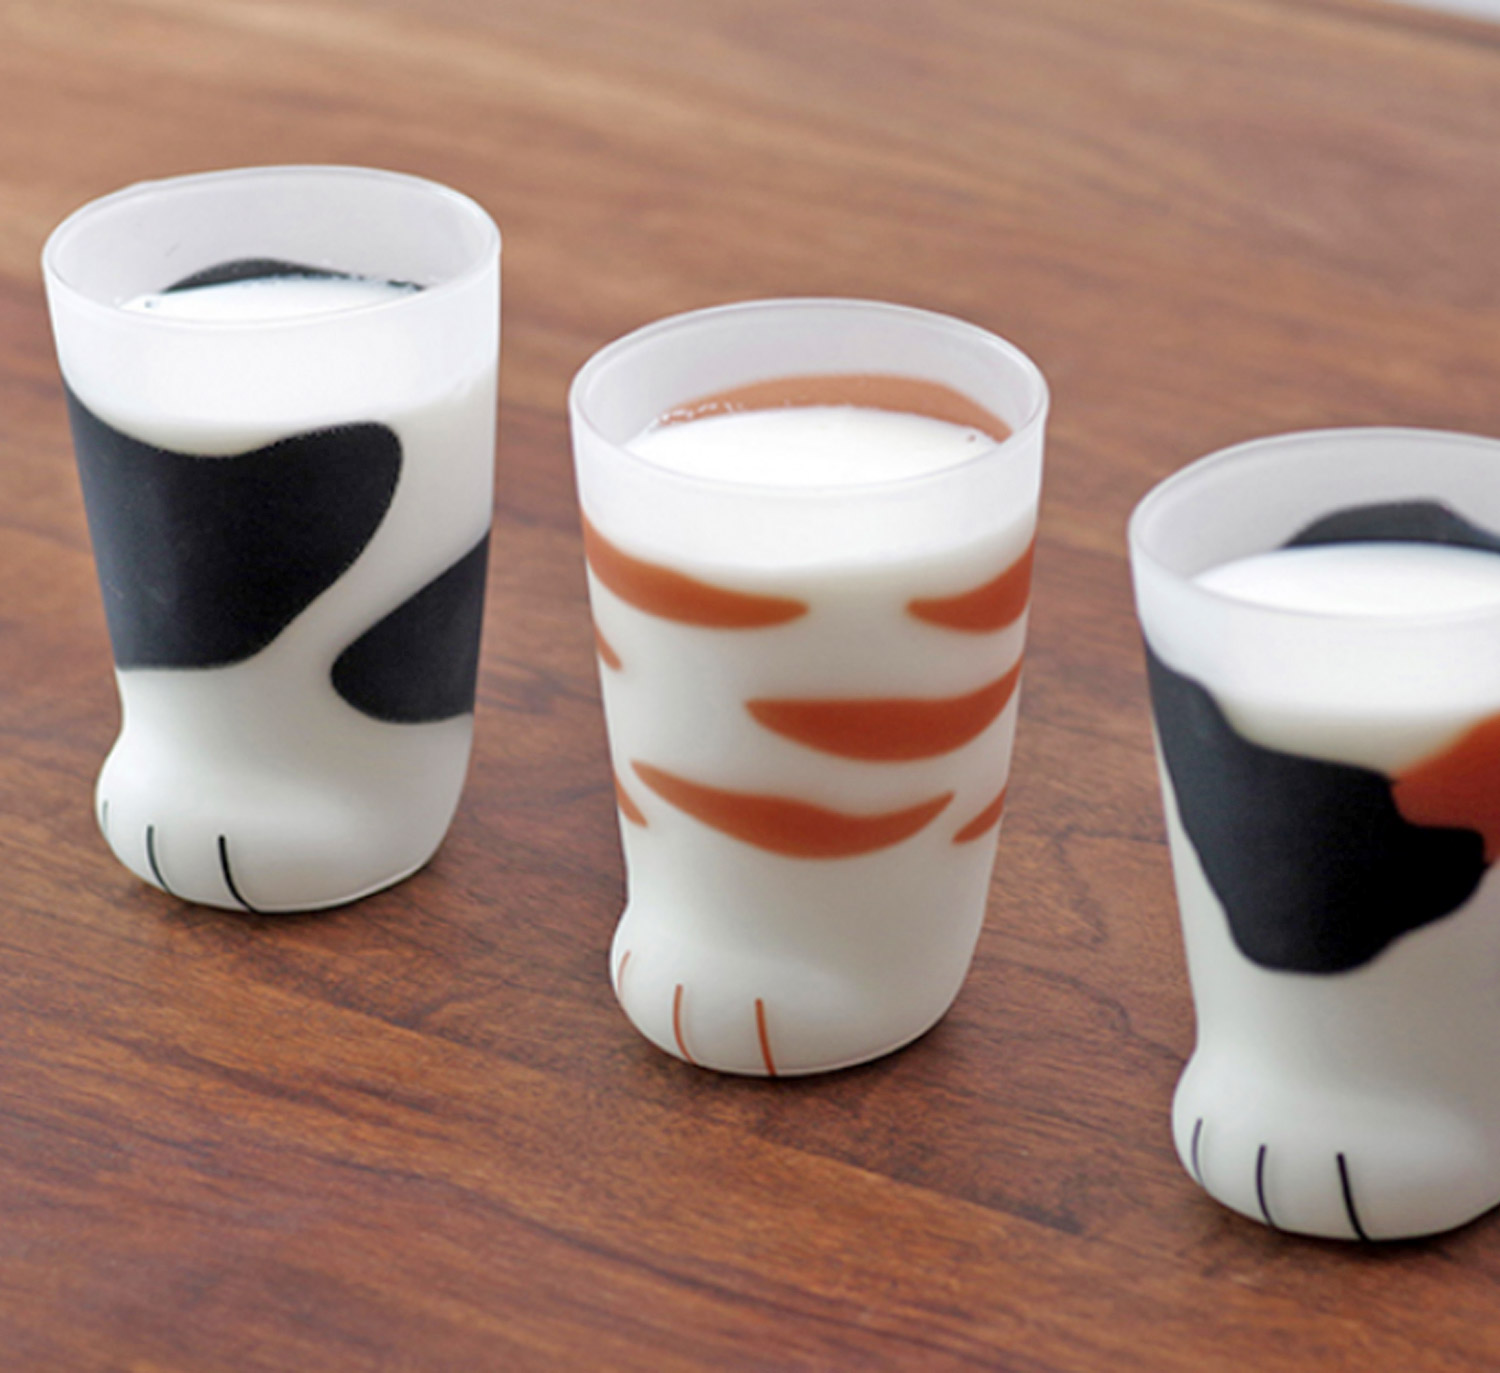 Cat paw shaped drinking cups